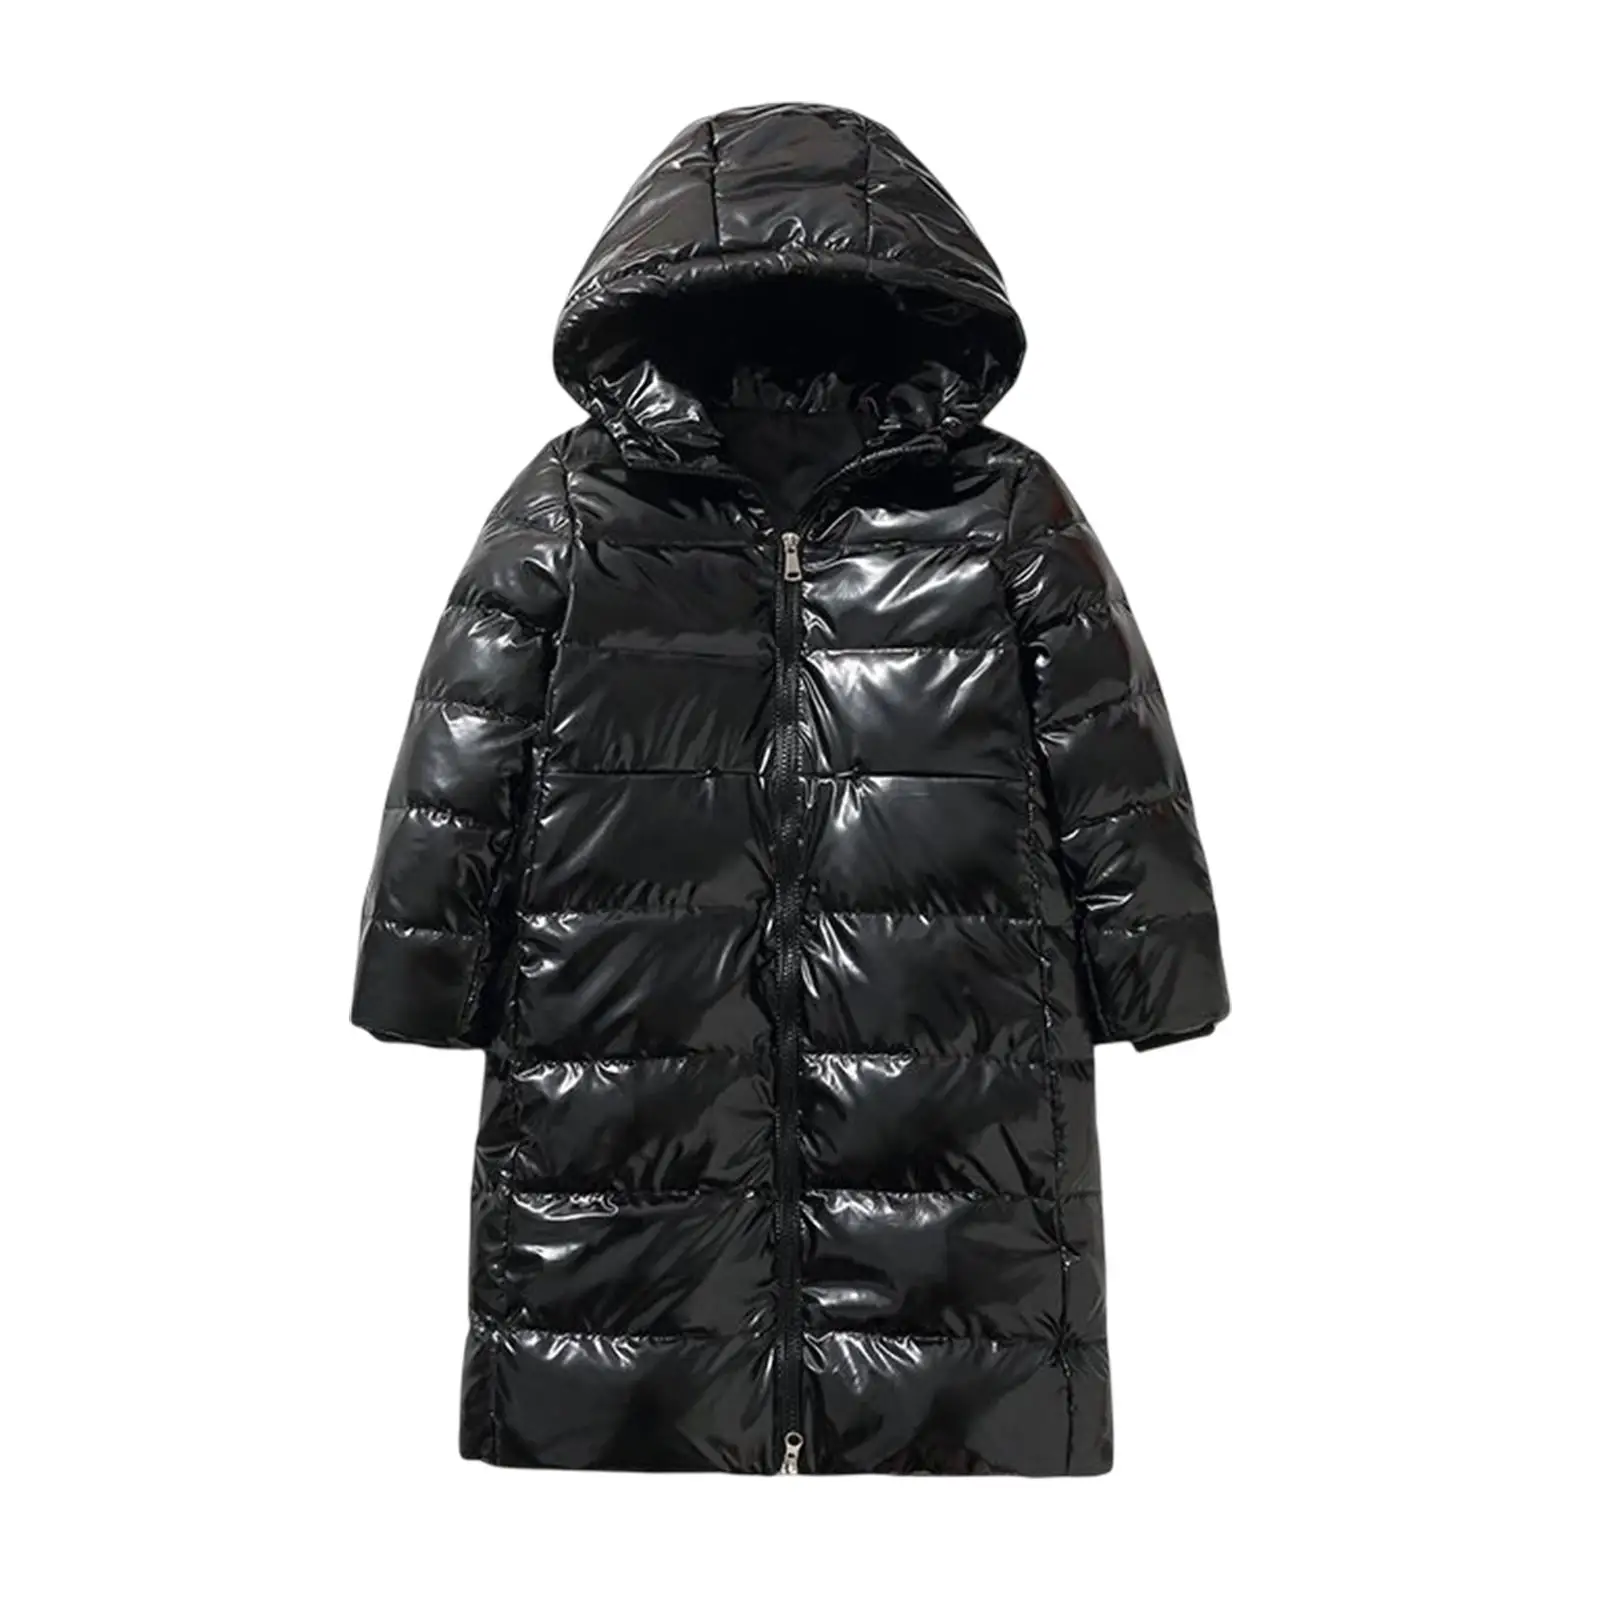 Children Long Jacket Over The knee to coat Lightweight Convenience Thick Down Thicken Puffer Jacket for Kids Winter